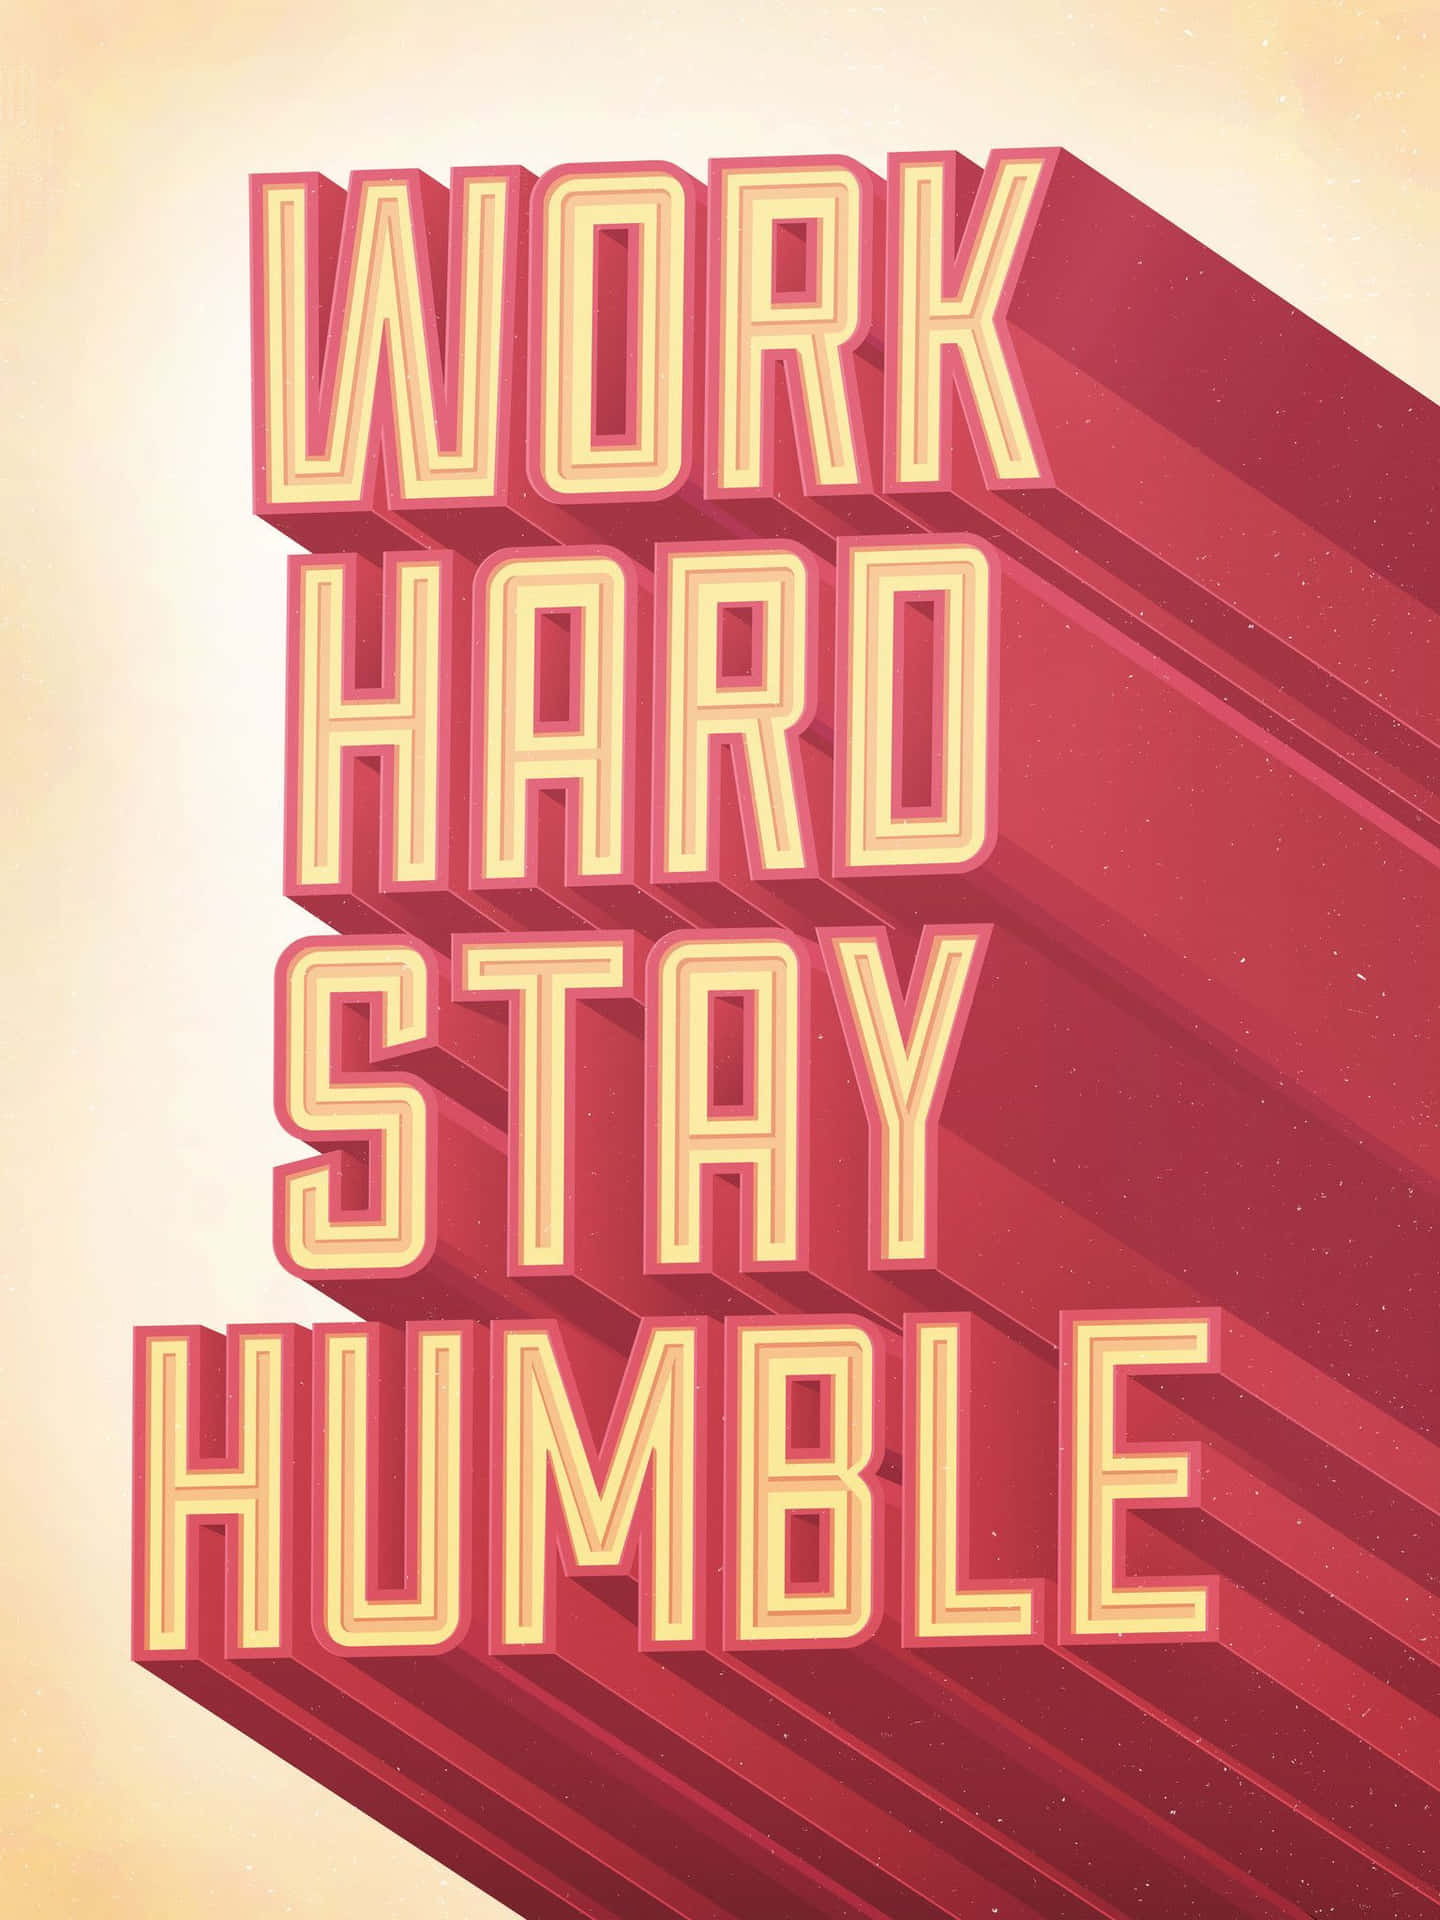 "Stay Humble and Generous" Wallpaper